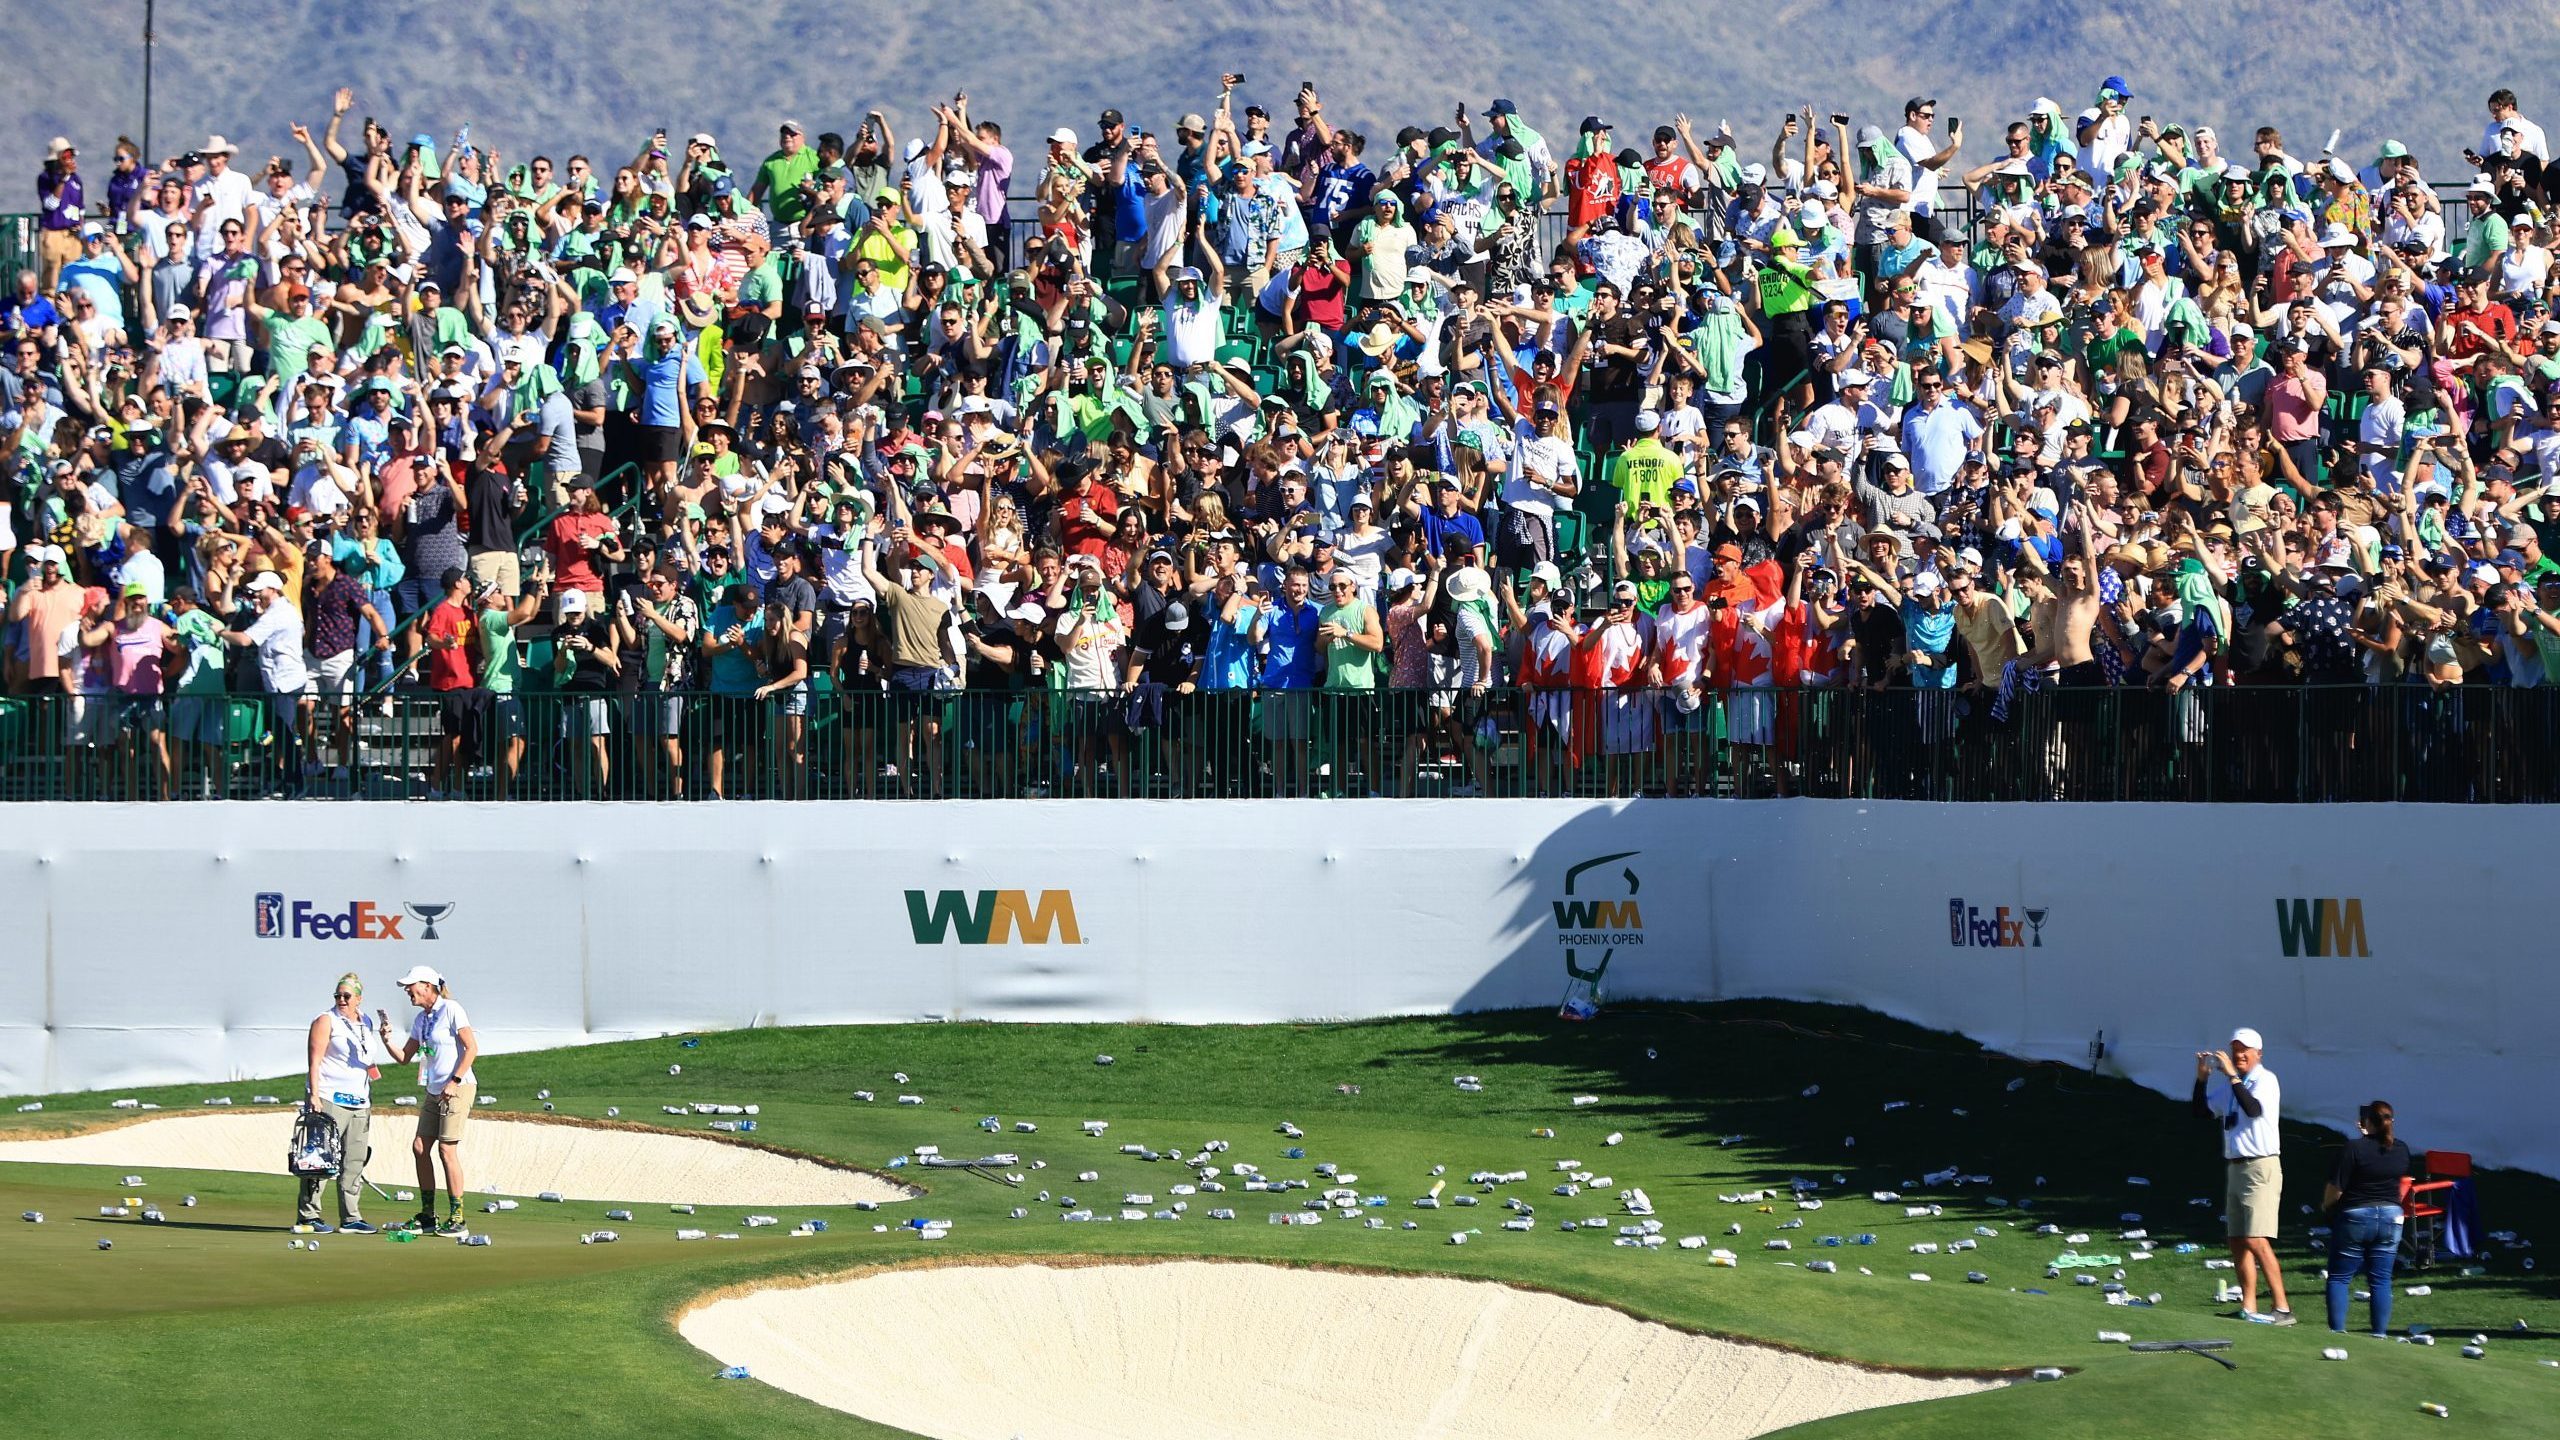 SCOTTSDALE, ARIZONA - FEBRUARY 12: Bottles litter the 16th hole after a hole-in-one by Sam Ryder of...